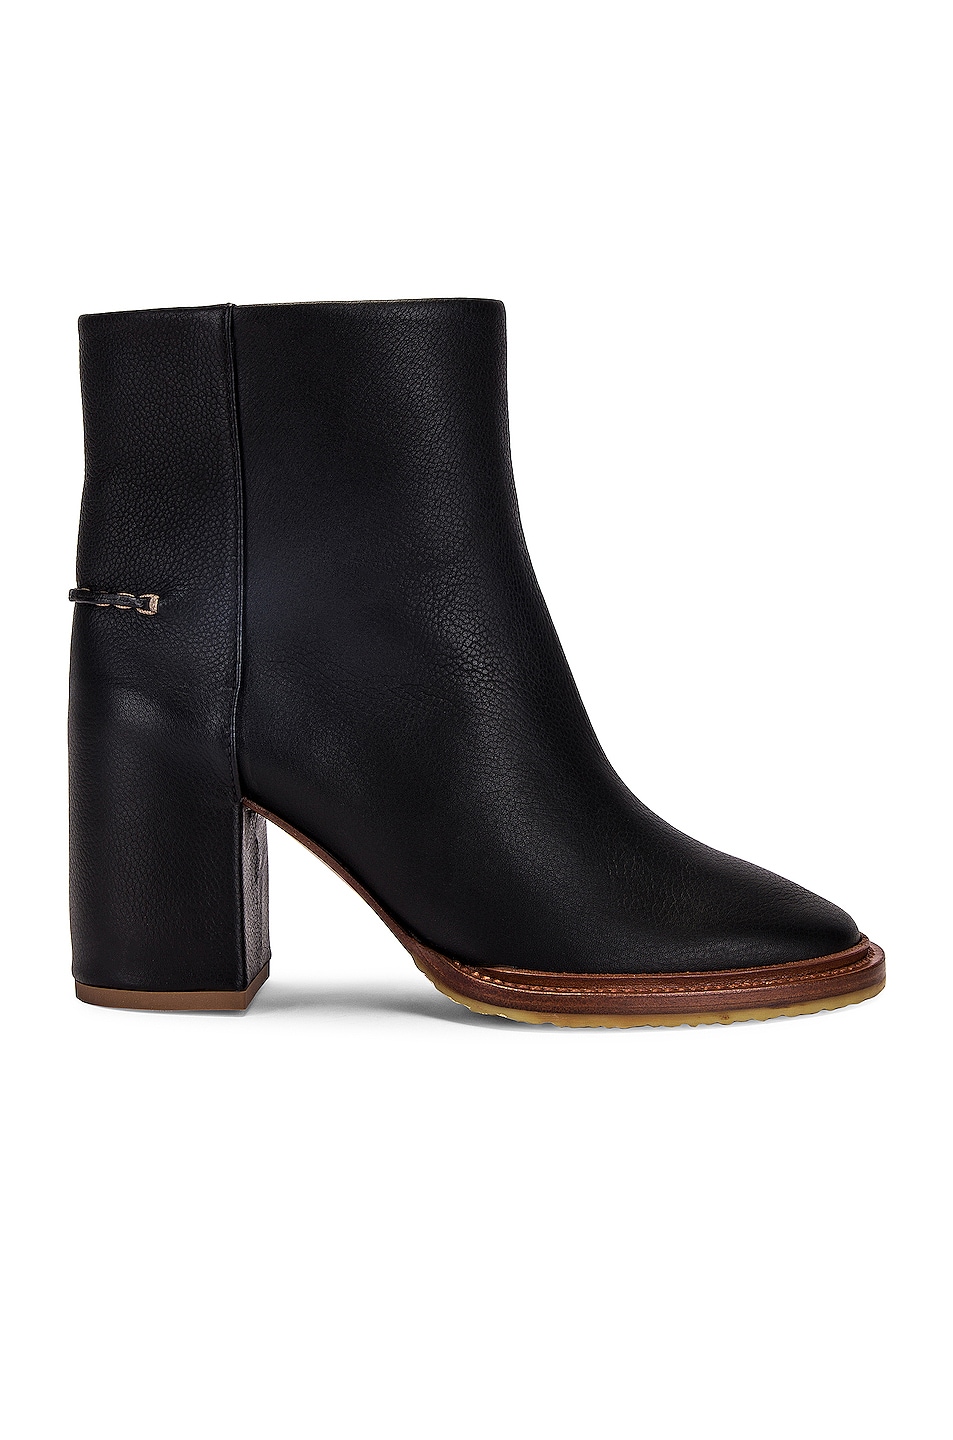 Image 1 of Chloe Edith Ankle Boots in Black